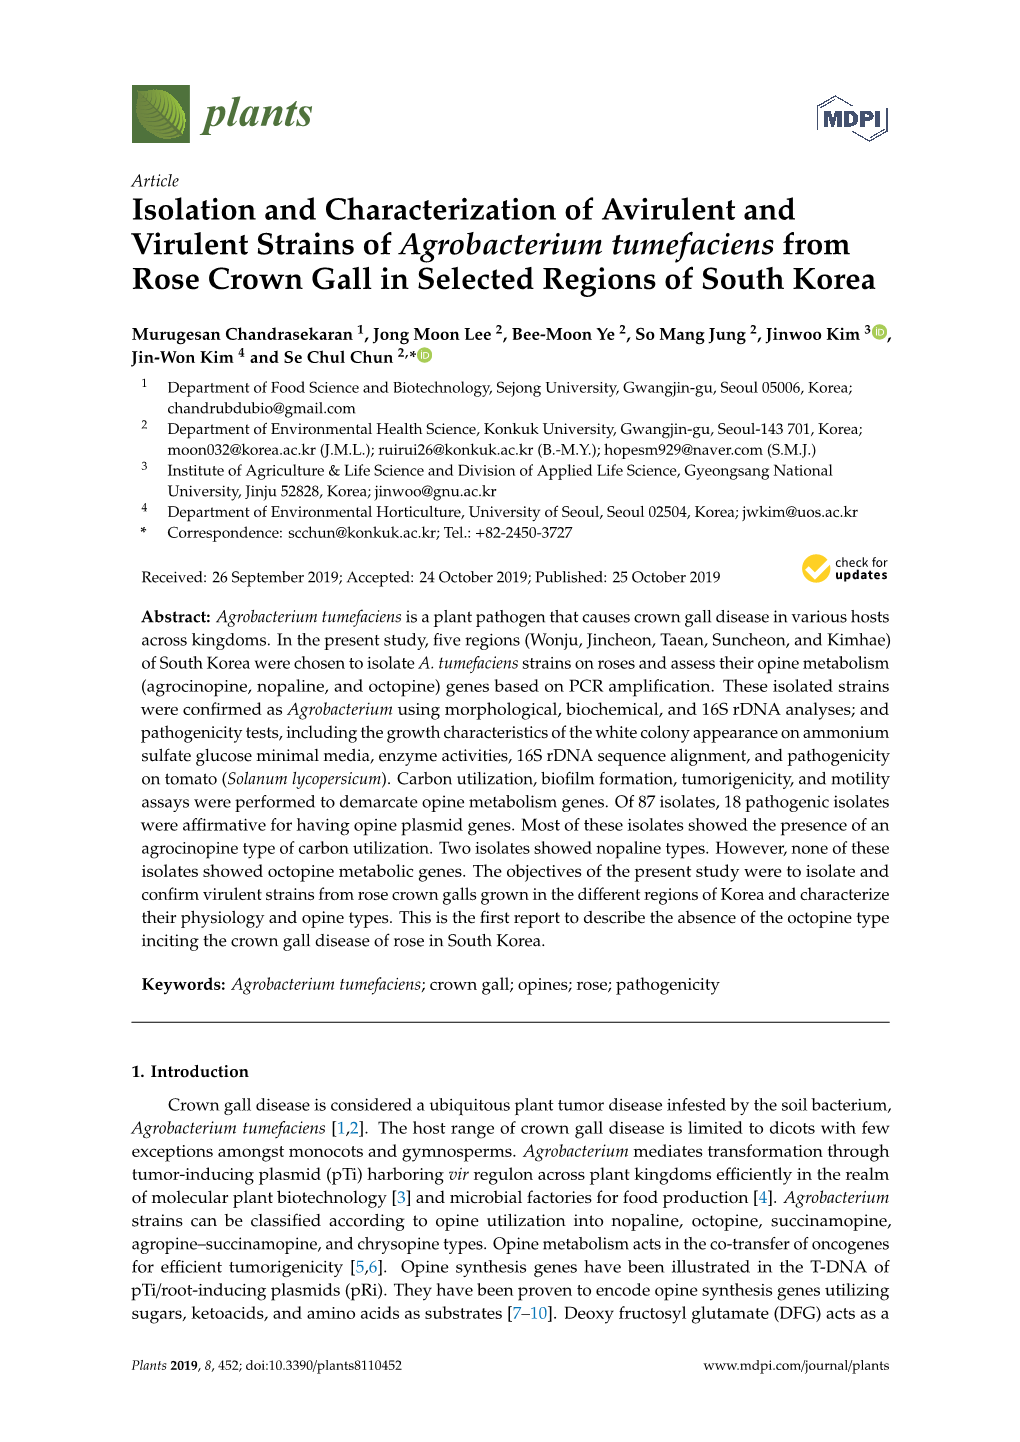 Isolation and Characterization of Avirulent and Virulent Strains of Agrobacterium Tumefaciens from Rose Crown Gall in Selected Regions of South Korea